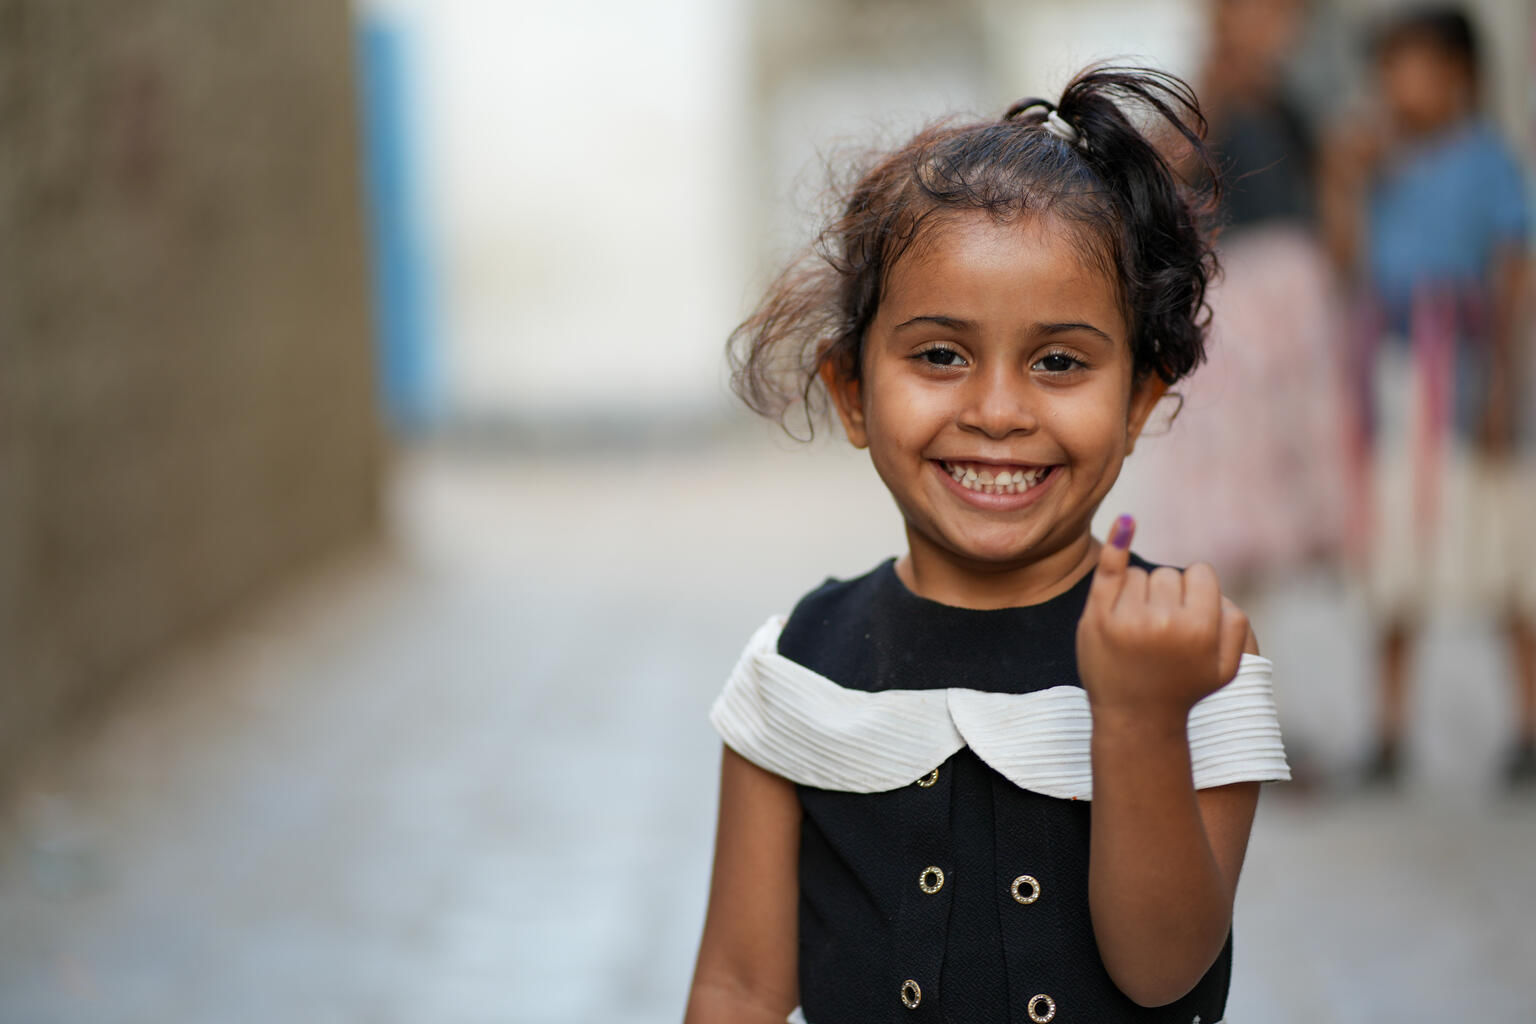 A young girl holds up her little finger, which has been marked to indicate that she has received her vaccines.